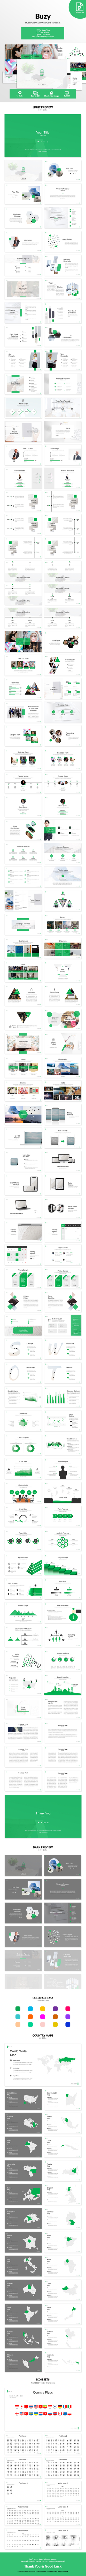 GraphicRiver Buzy Multipurpose PowerPoint Template 20901218